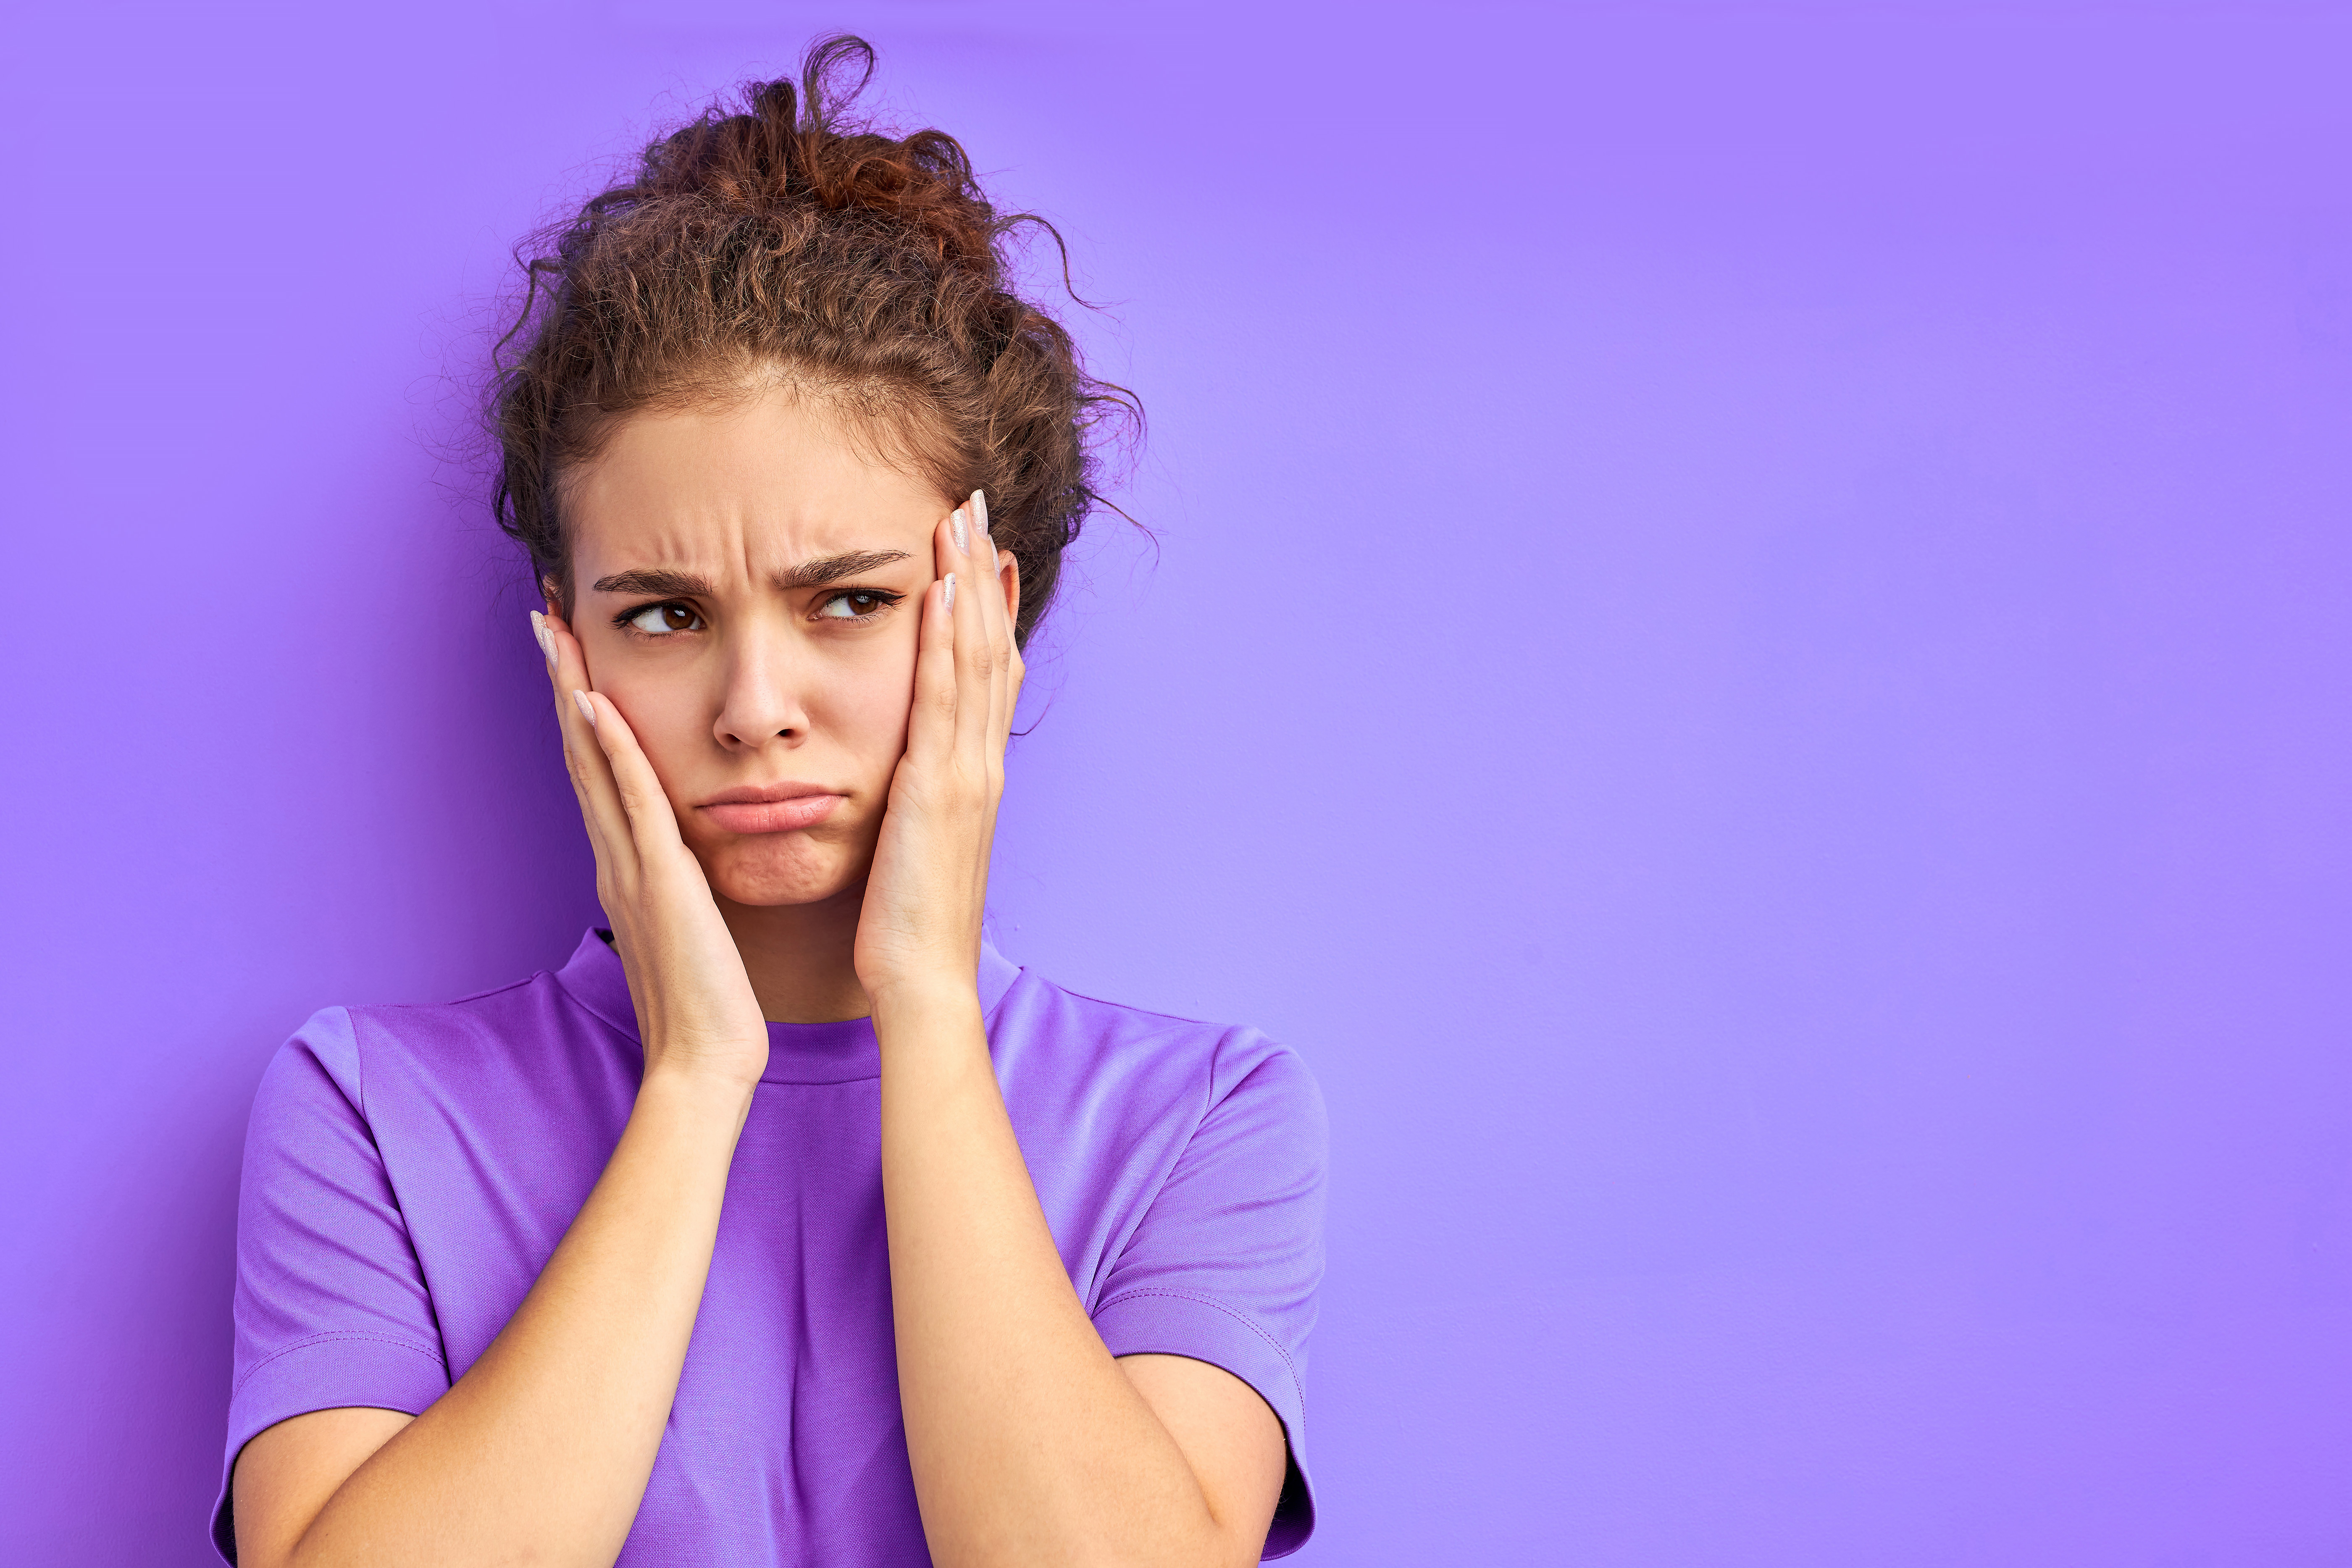 Unhappy woman wearing purple with purple background